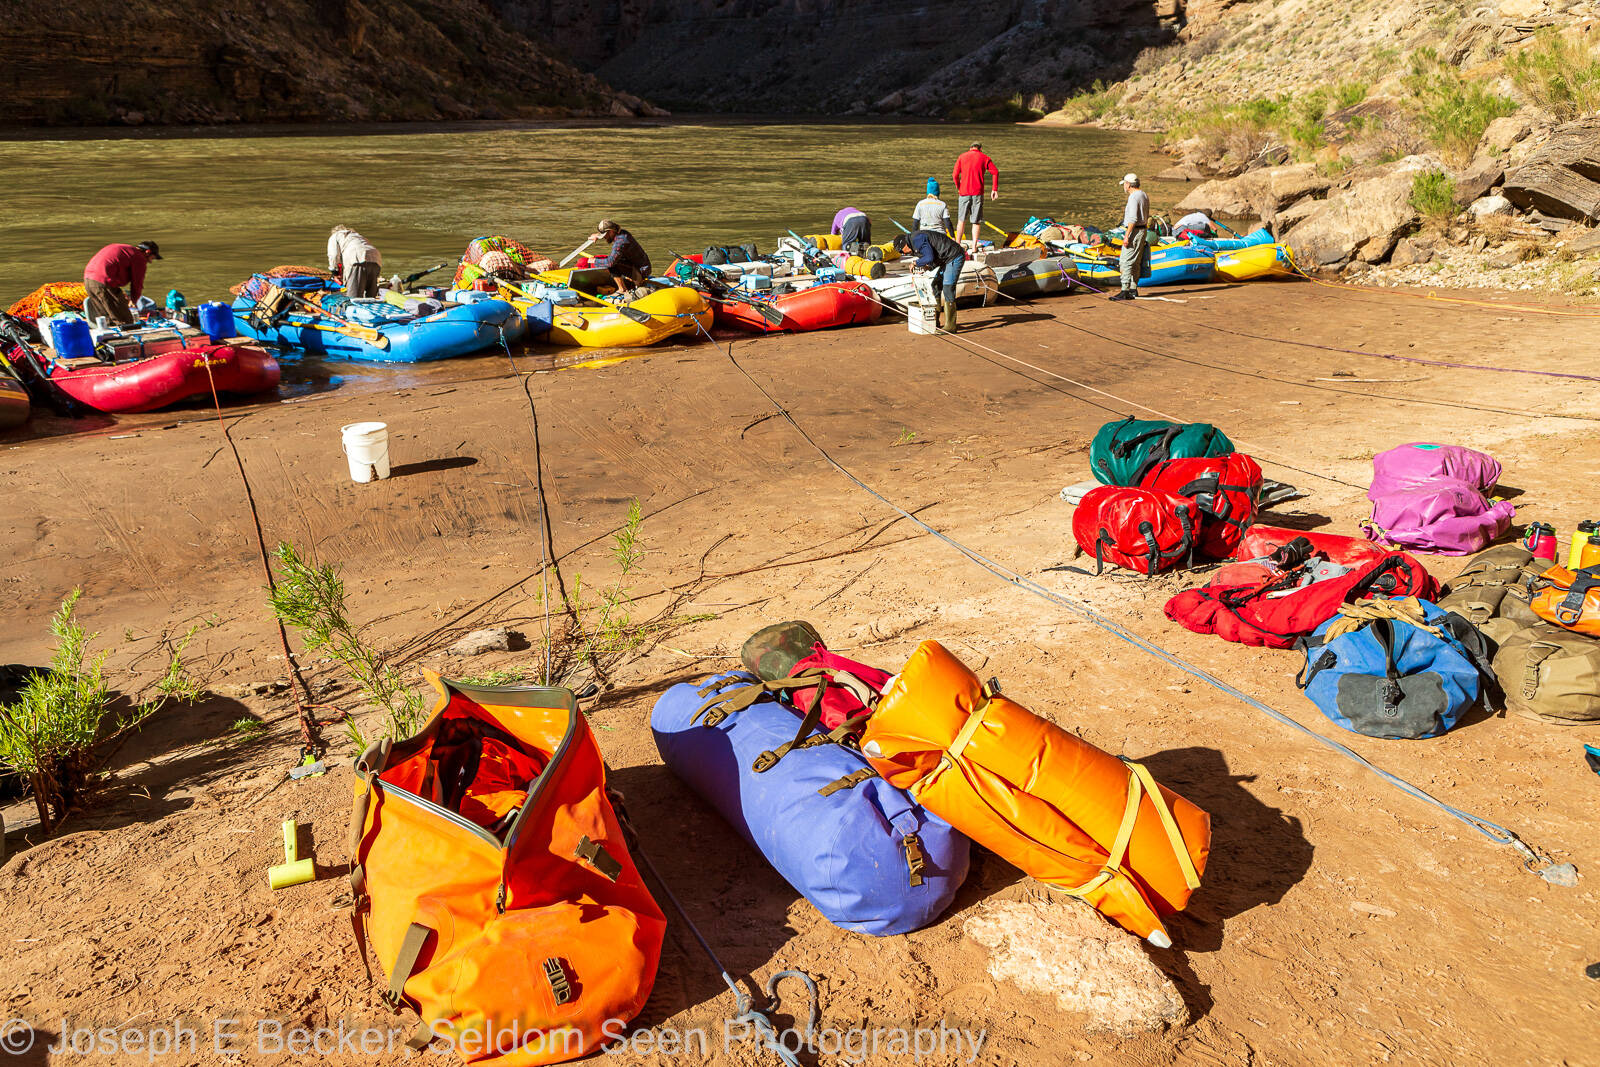 Image of Rafting the Grand Canyon - Phantom Ranch to Pearce Ferry by Joe Becker